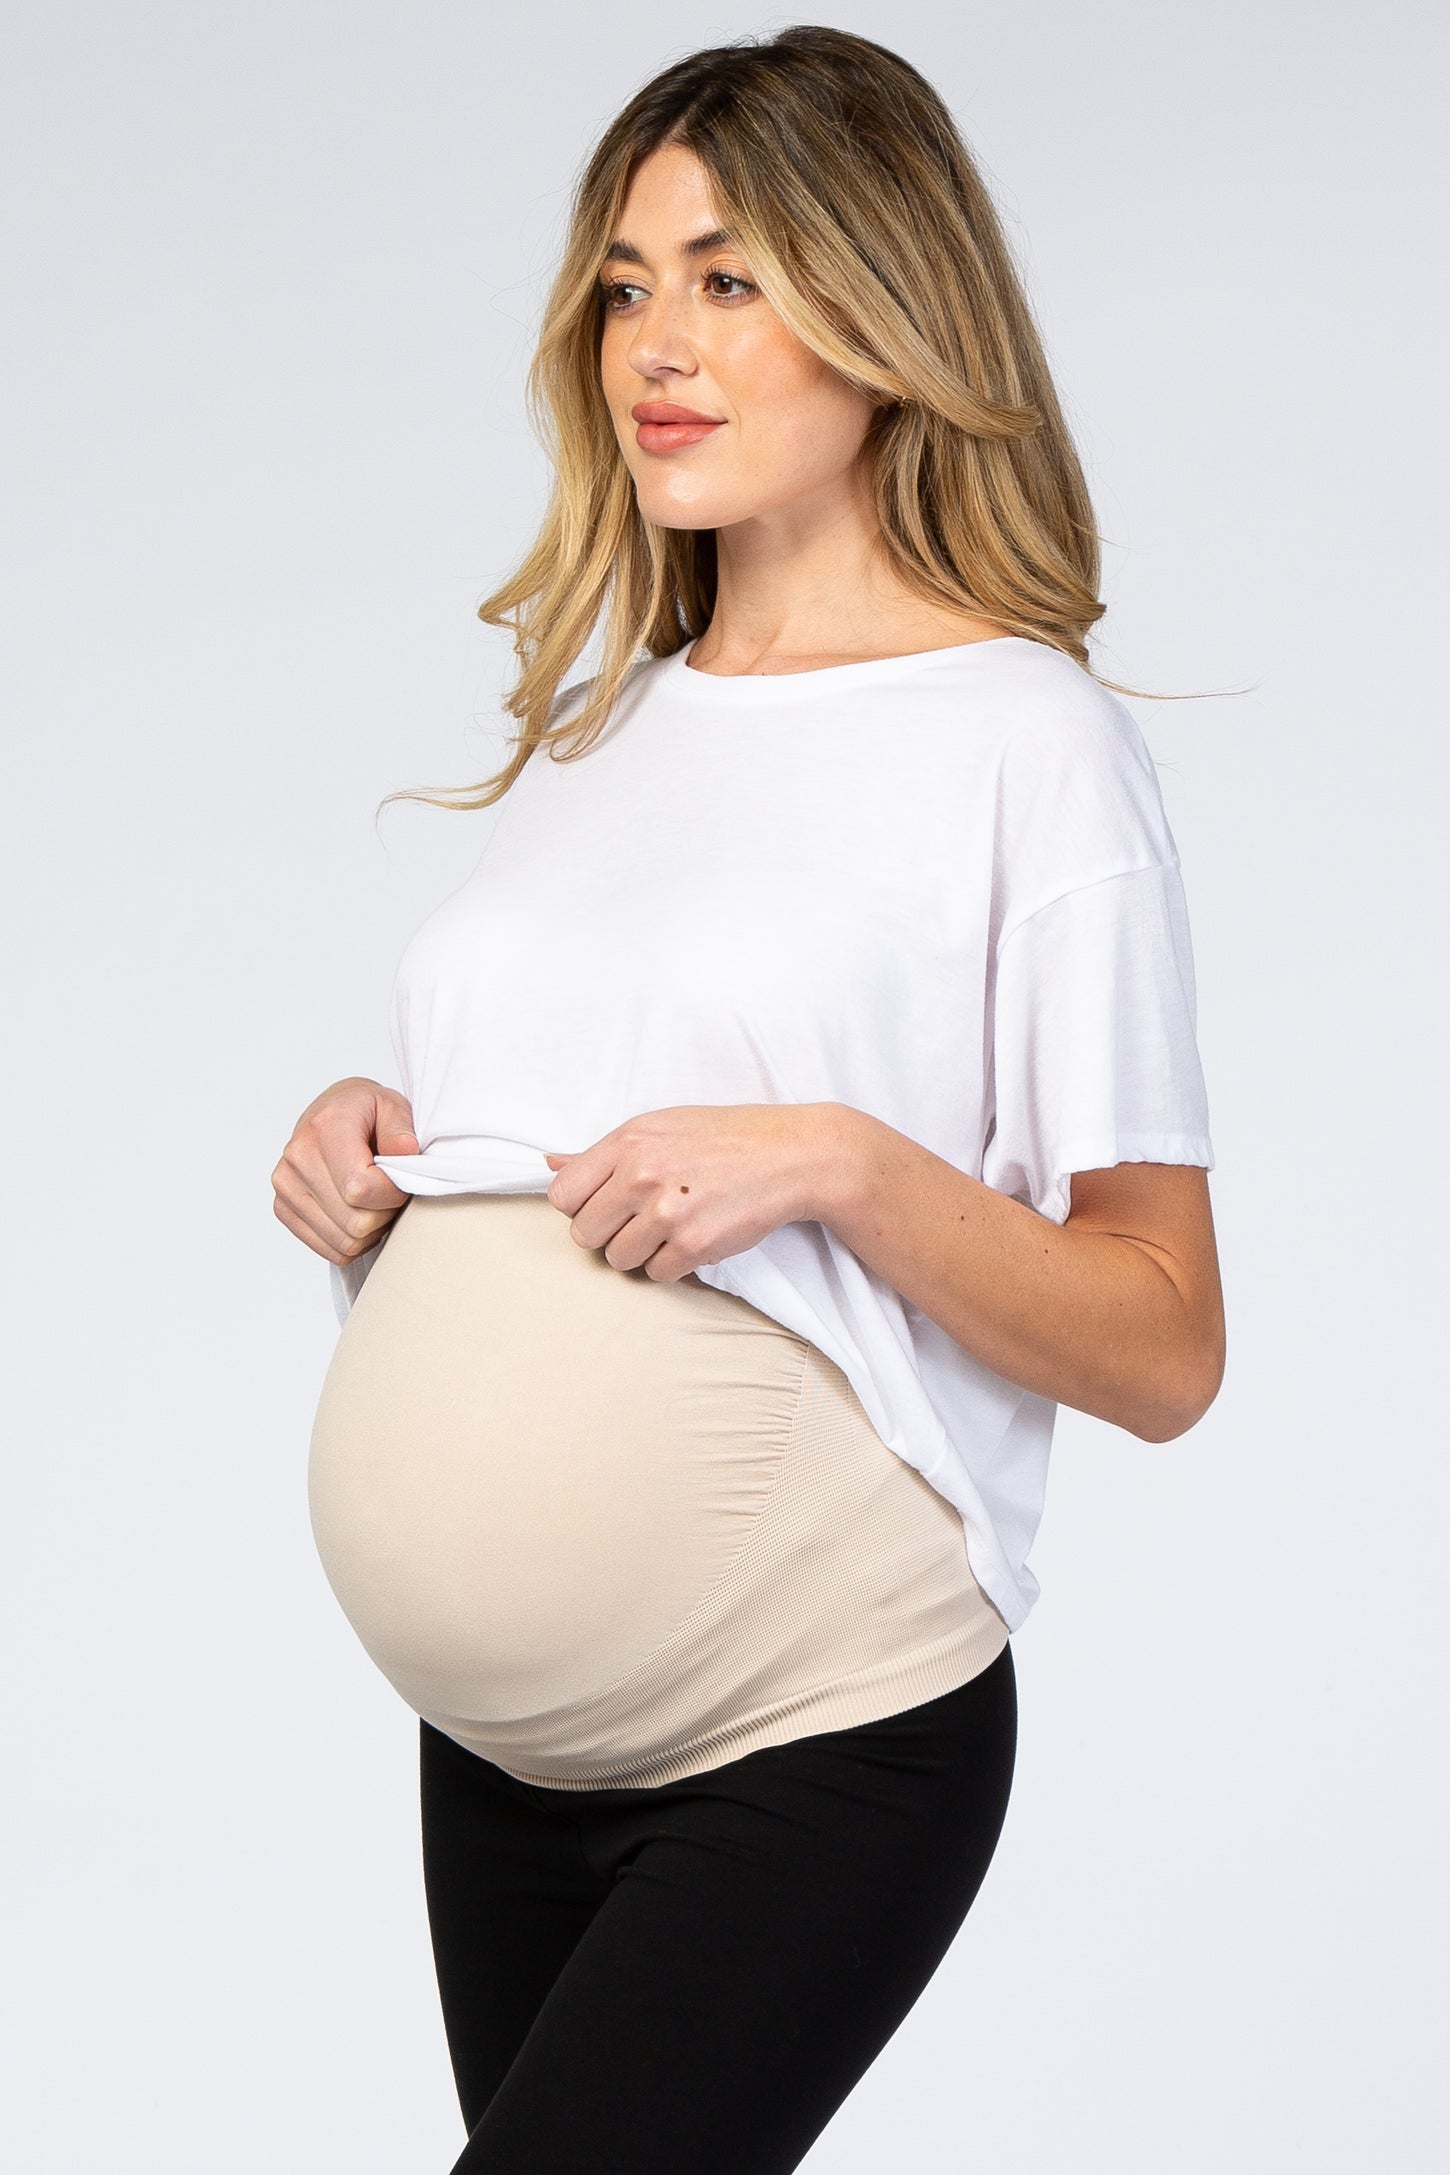 Beige Belly Bandit Belly Boost Pregnancy Support Wrap– PinkBlush